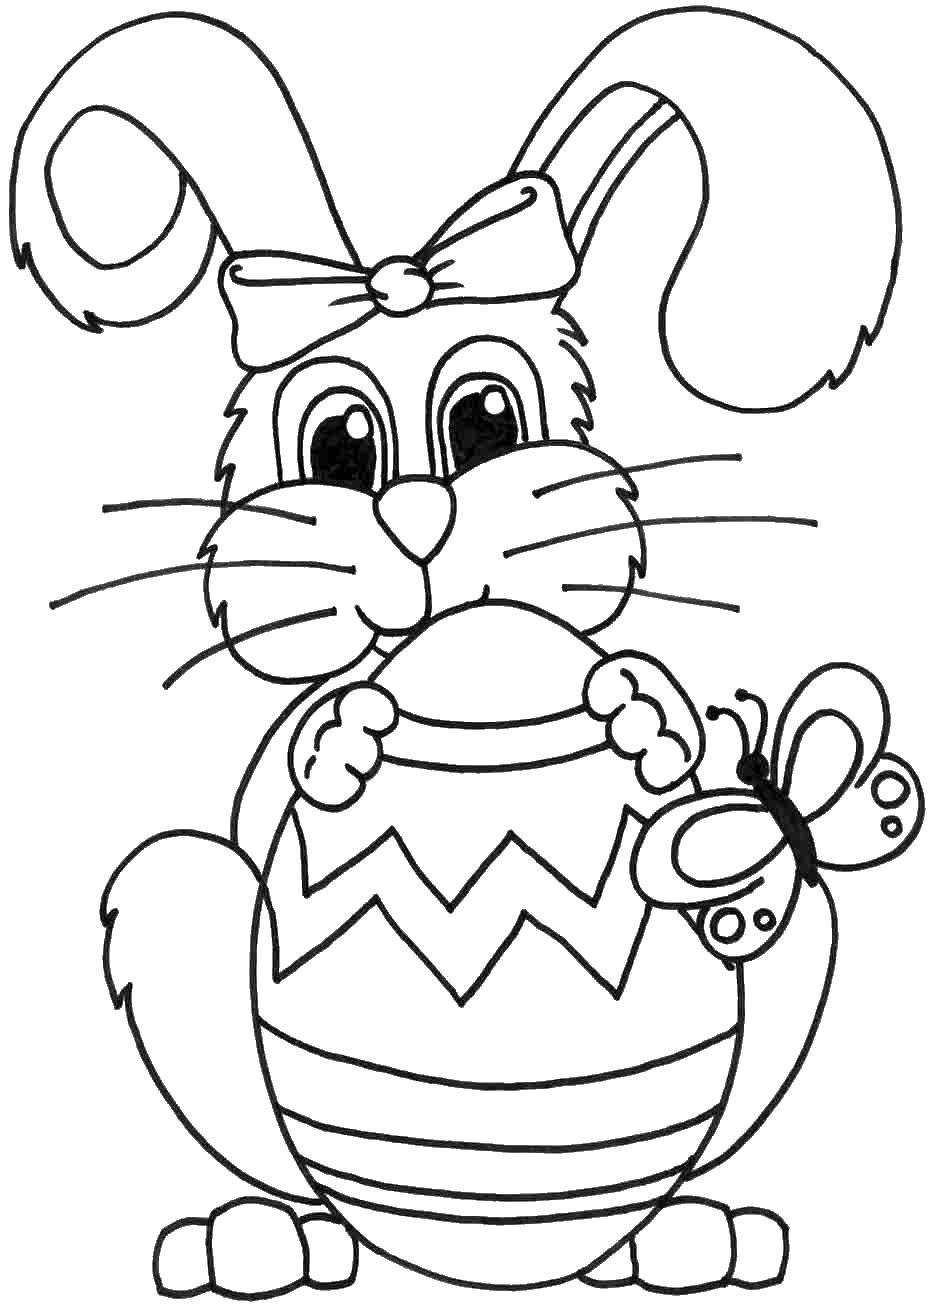 Coloring Rabbit with butterfly and egg. Category the rabbit. Tags:  rabbit, Easter.